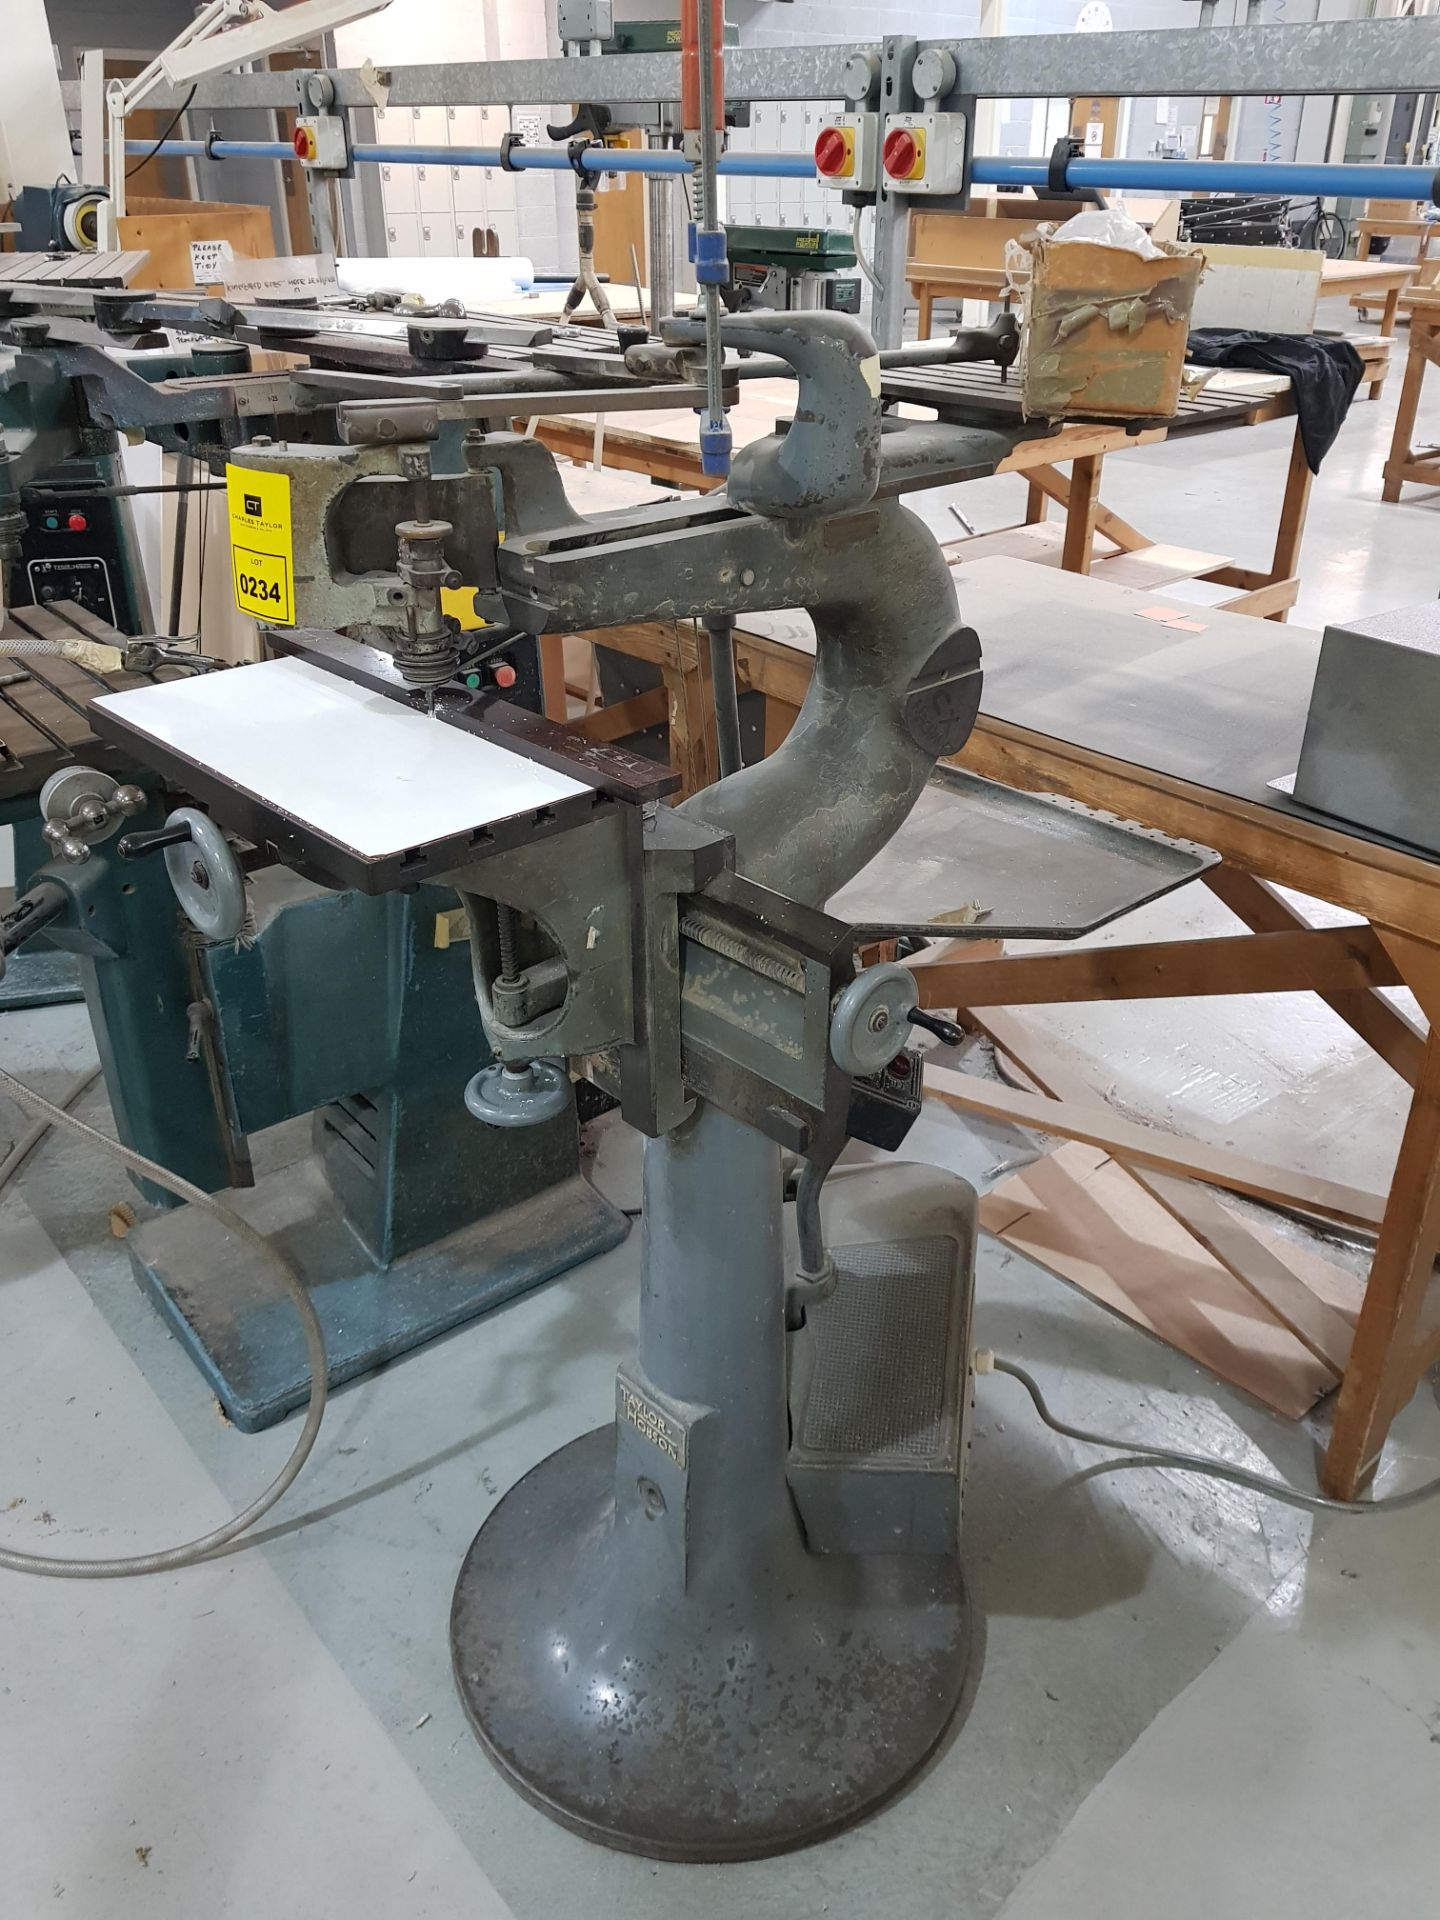 1 X TAYLOR HOBSON PEDESTAL MANUAL PANTOGRAPH ENGRAVING MACHINE. (ASSETS LOCATED IN DENTON, - Image 2 of 3